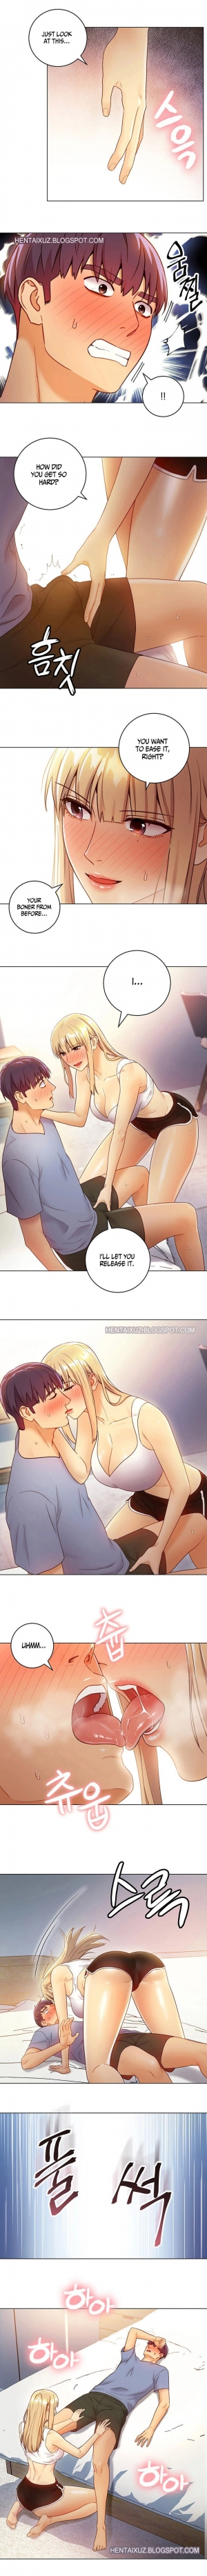  [Neck Pilllow] Stepmother Friends Ch.39/? [English] [Hentai Universe] NEW! 13/10/2020  - Page 361